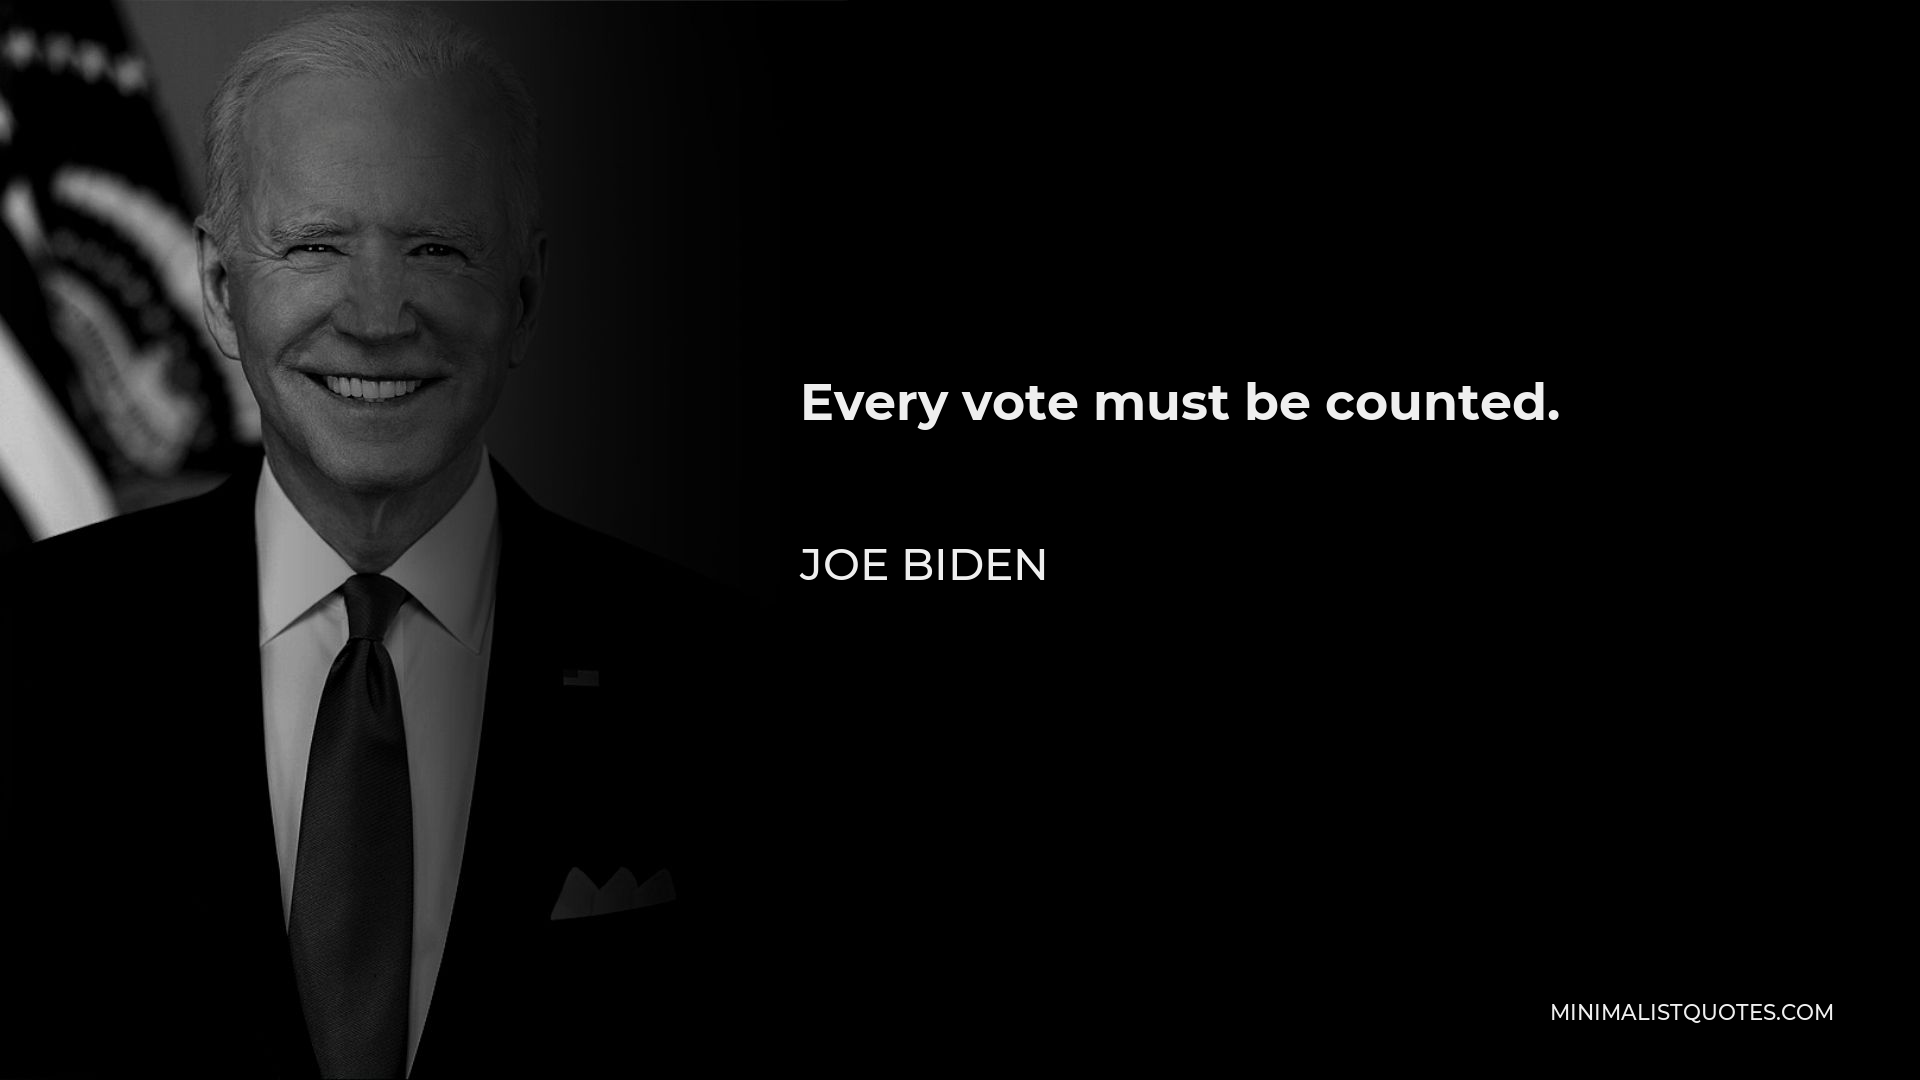 Joe Biden Quote - Every vote must be counted.